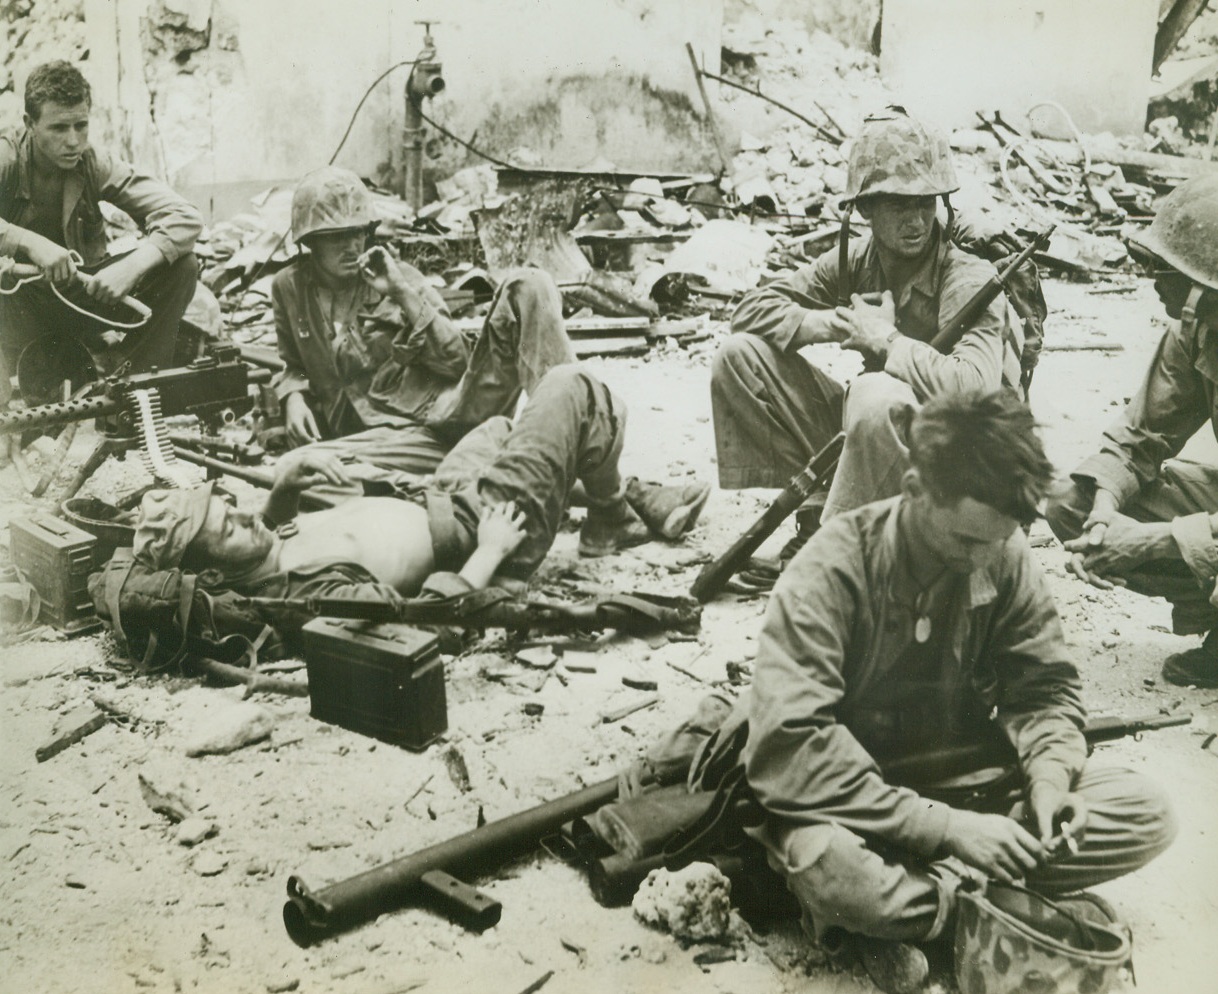 No Targets—Gun Crew Rests, 8/11/1944. AGANA, GUAM – When they ran out of Japs to shoot at on Agana, these gun crew members laid down their arms to relax for awhile, but they leave the cartridge belt in their gun—just in case. Left to right: Pfc. W. C. Dean, Meridian, Miss.; Pfc. R. A. Rouse, Cincinnati, Oh.; Pfc. E. J. Bernier (lying down), River Rouge, Michigan; and Cpl. T. L. McHugh, Cincinnati, Oh. Men in foreground and at extreme right are unidentified. All are of the Third Marine Division Credit: ACME;